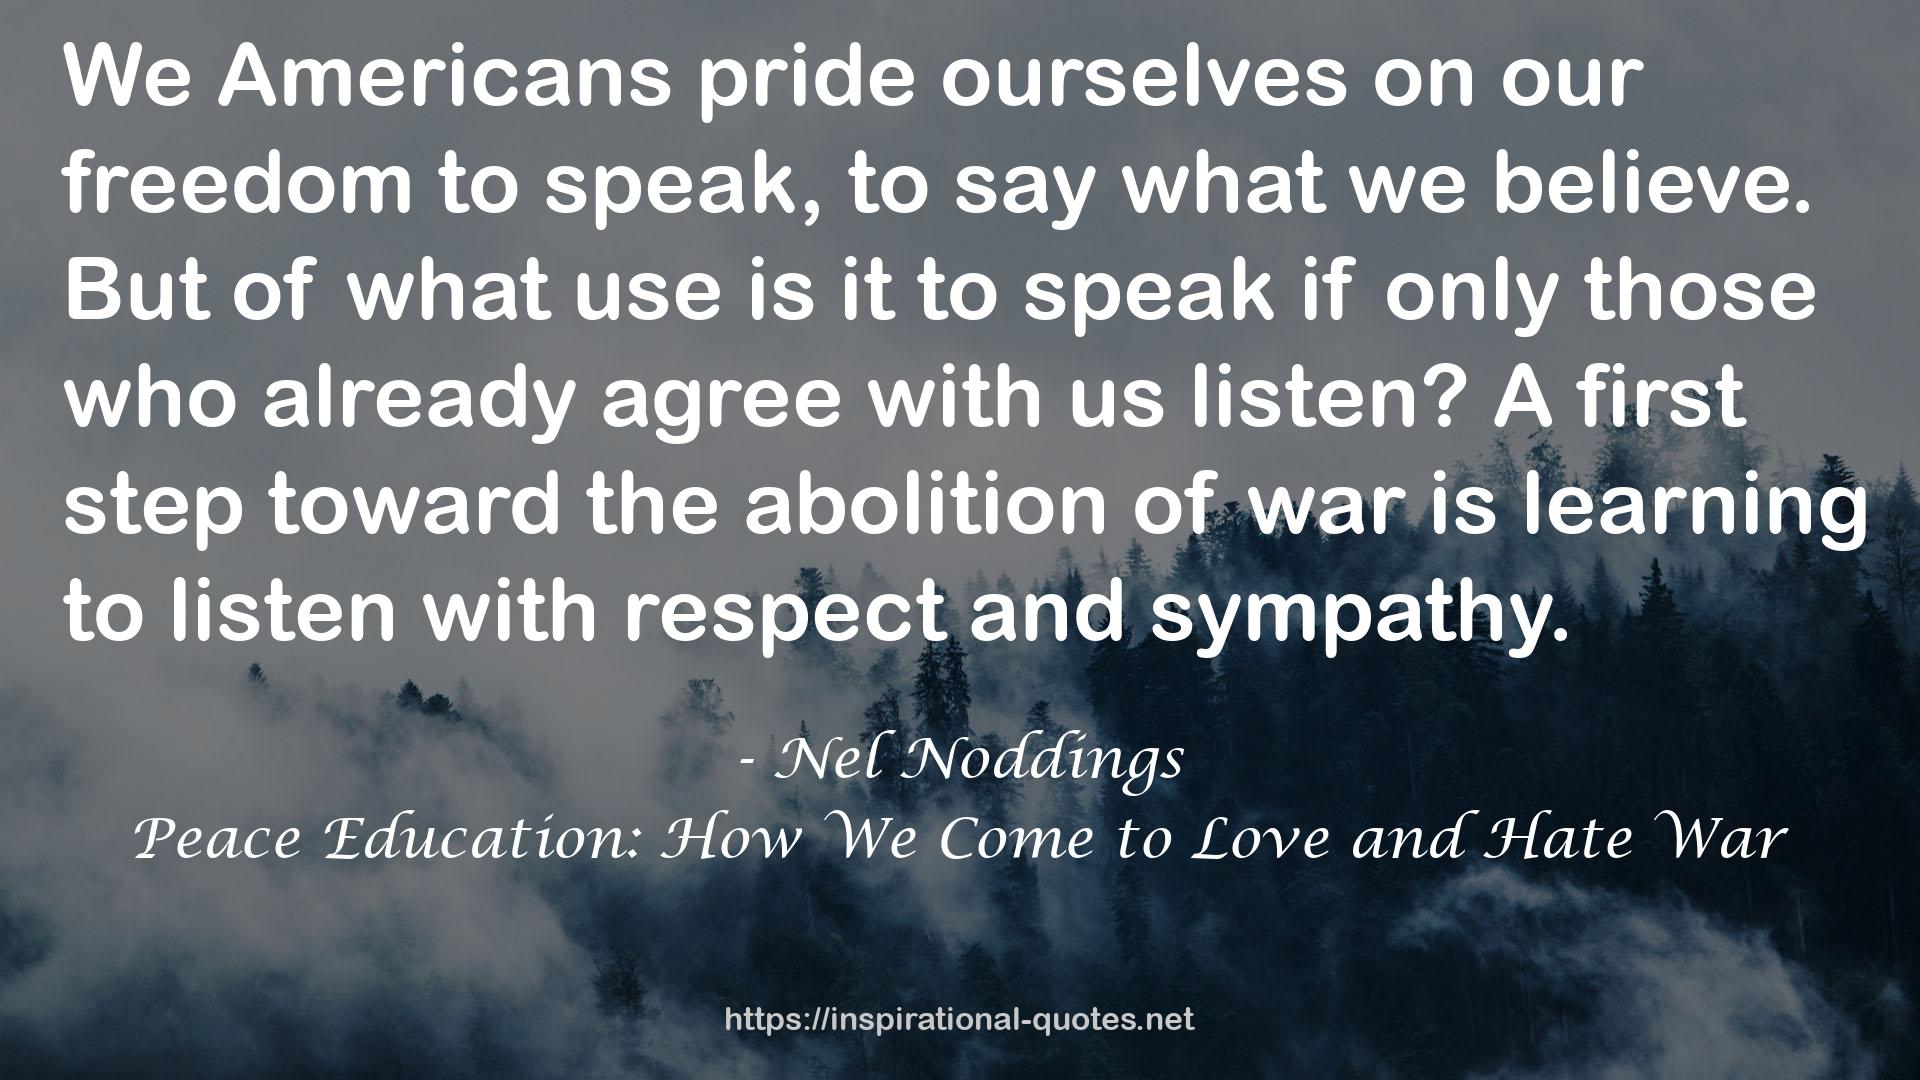 Peace Education: How We Come to Love and Hate War QUOTES